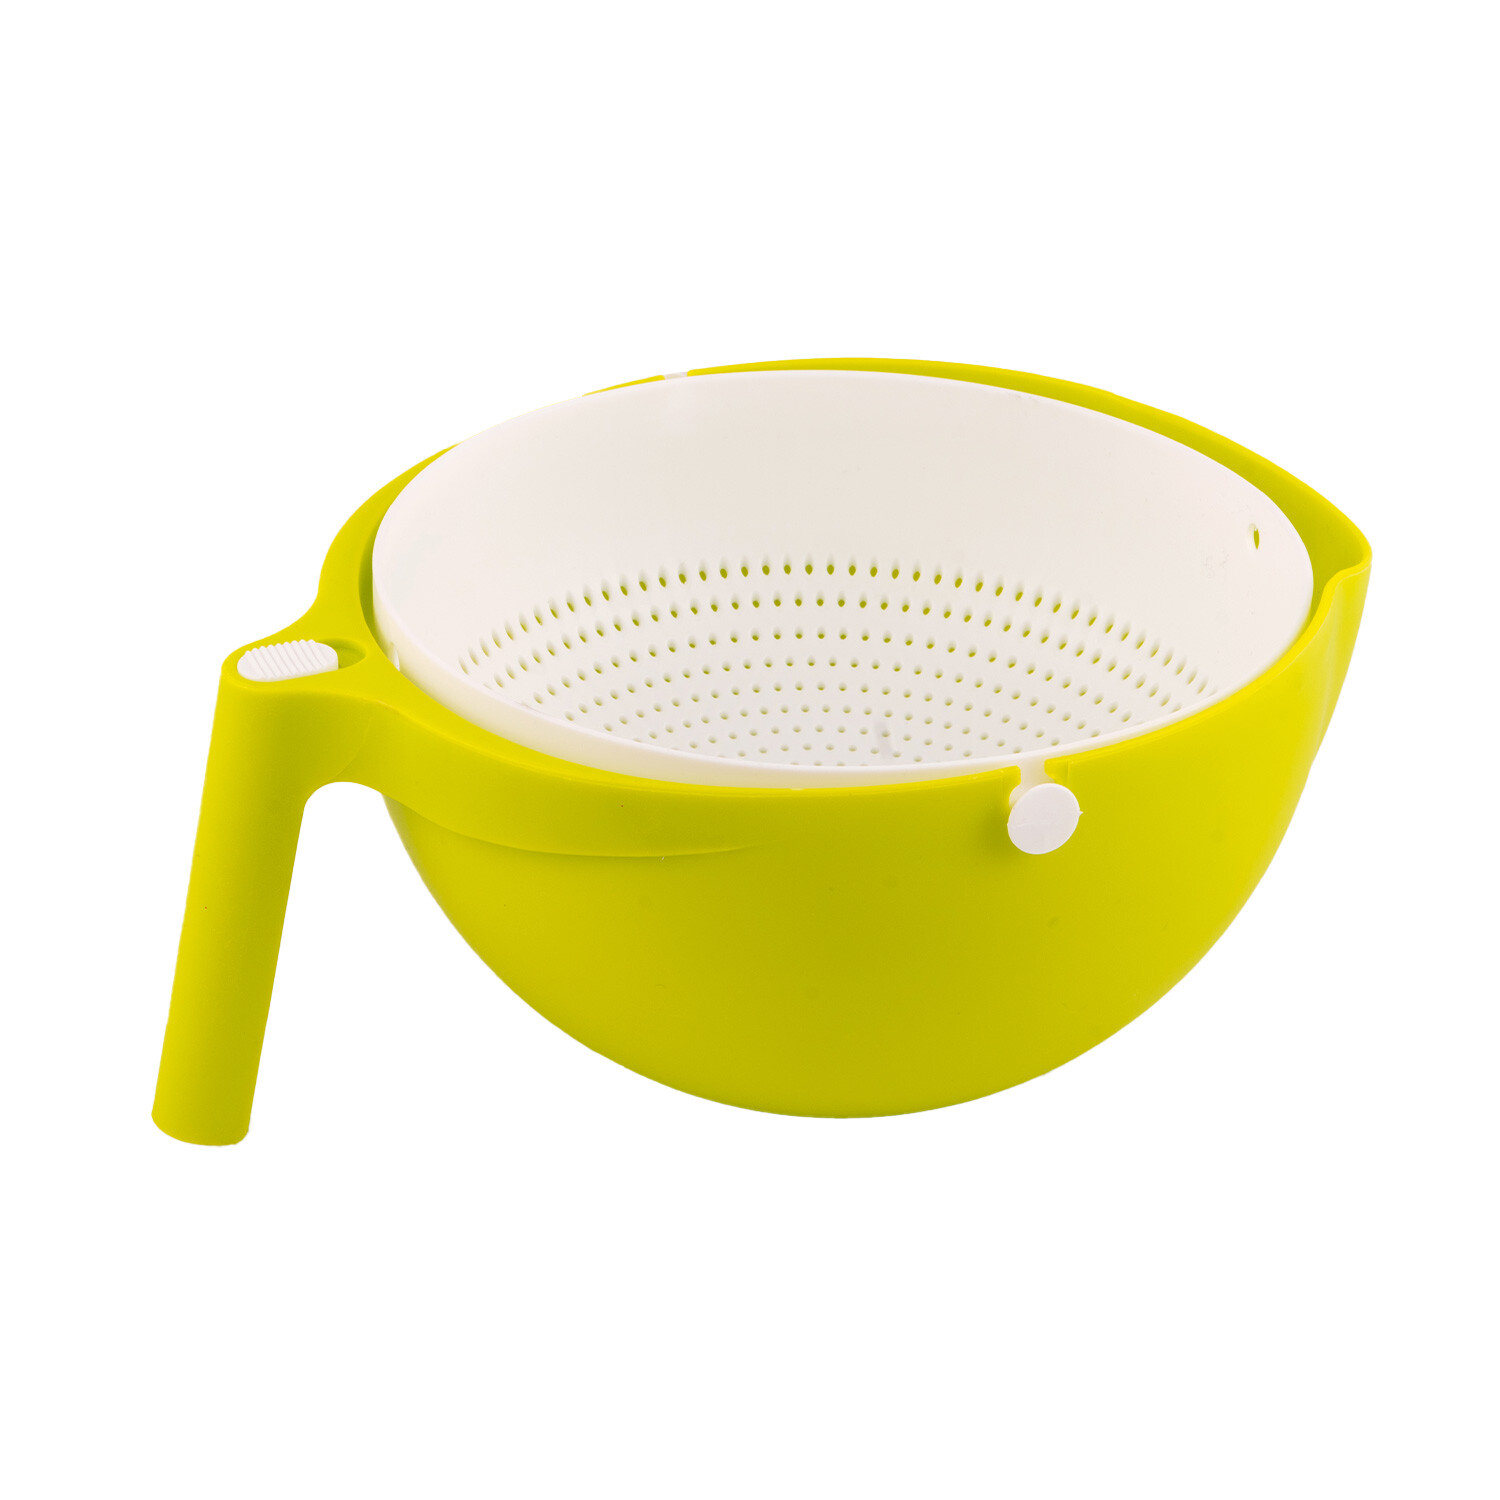 Creative Green Clever Colander Image 2